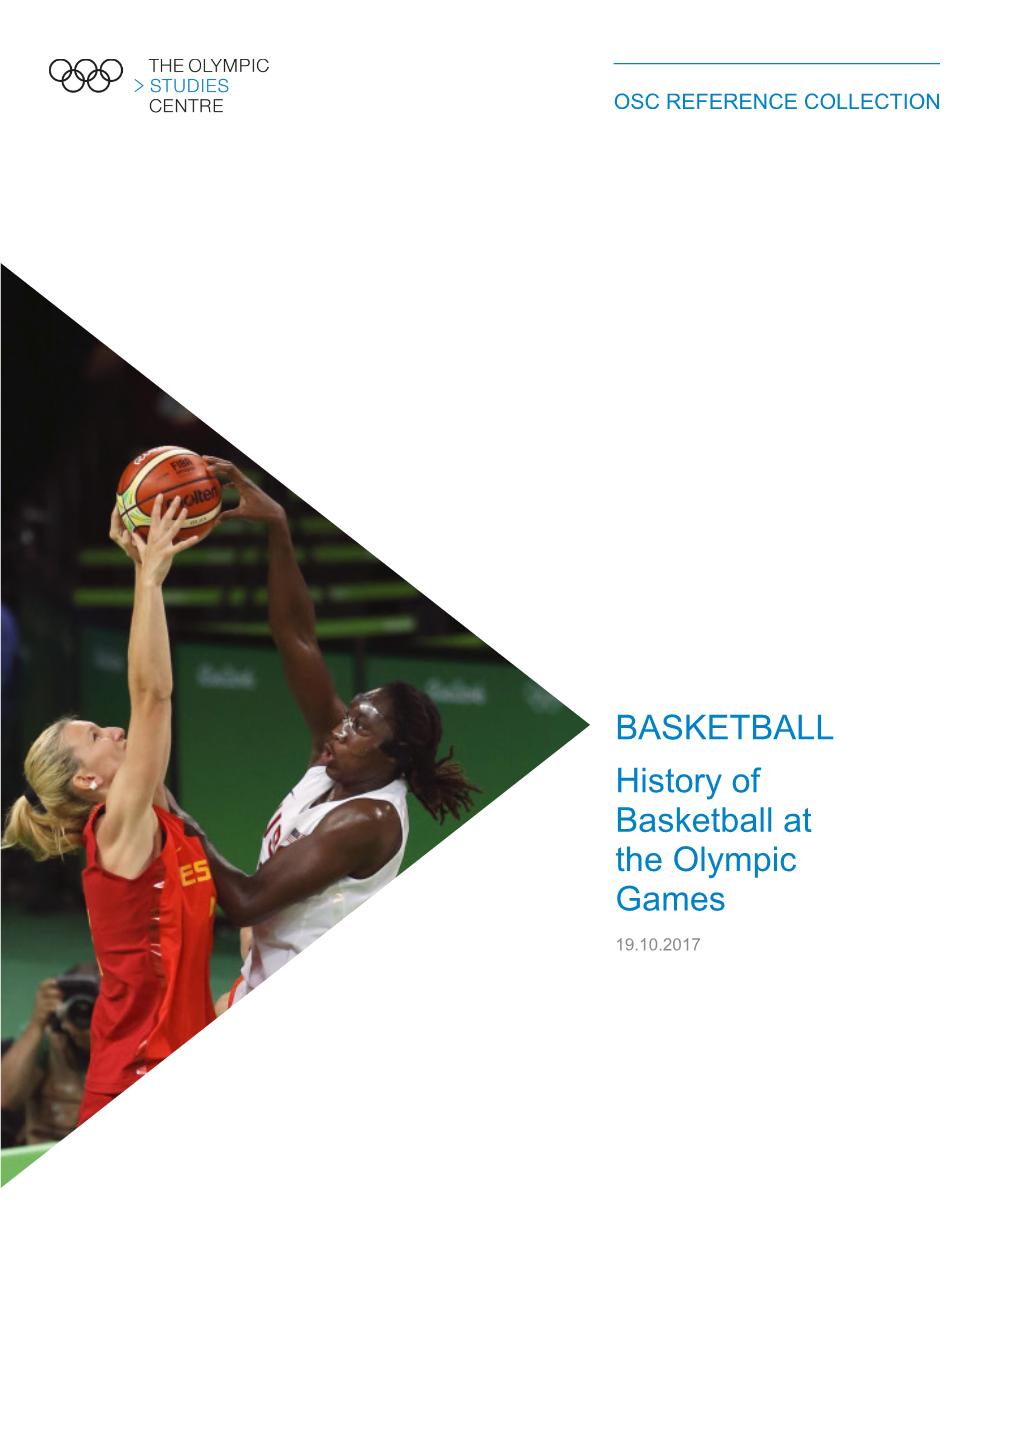 BASKETBALL History of Basketball at the Olympic Games